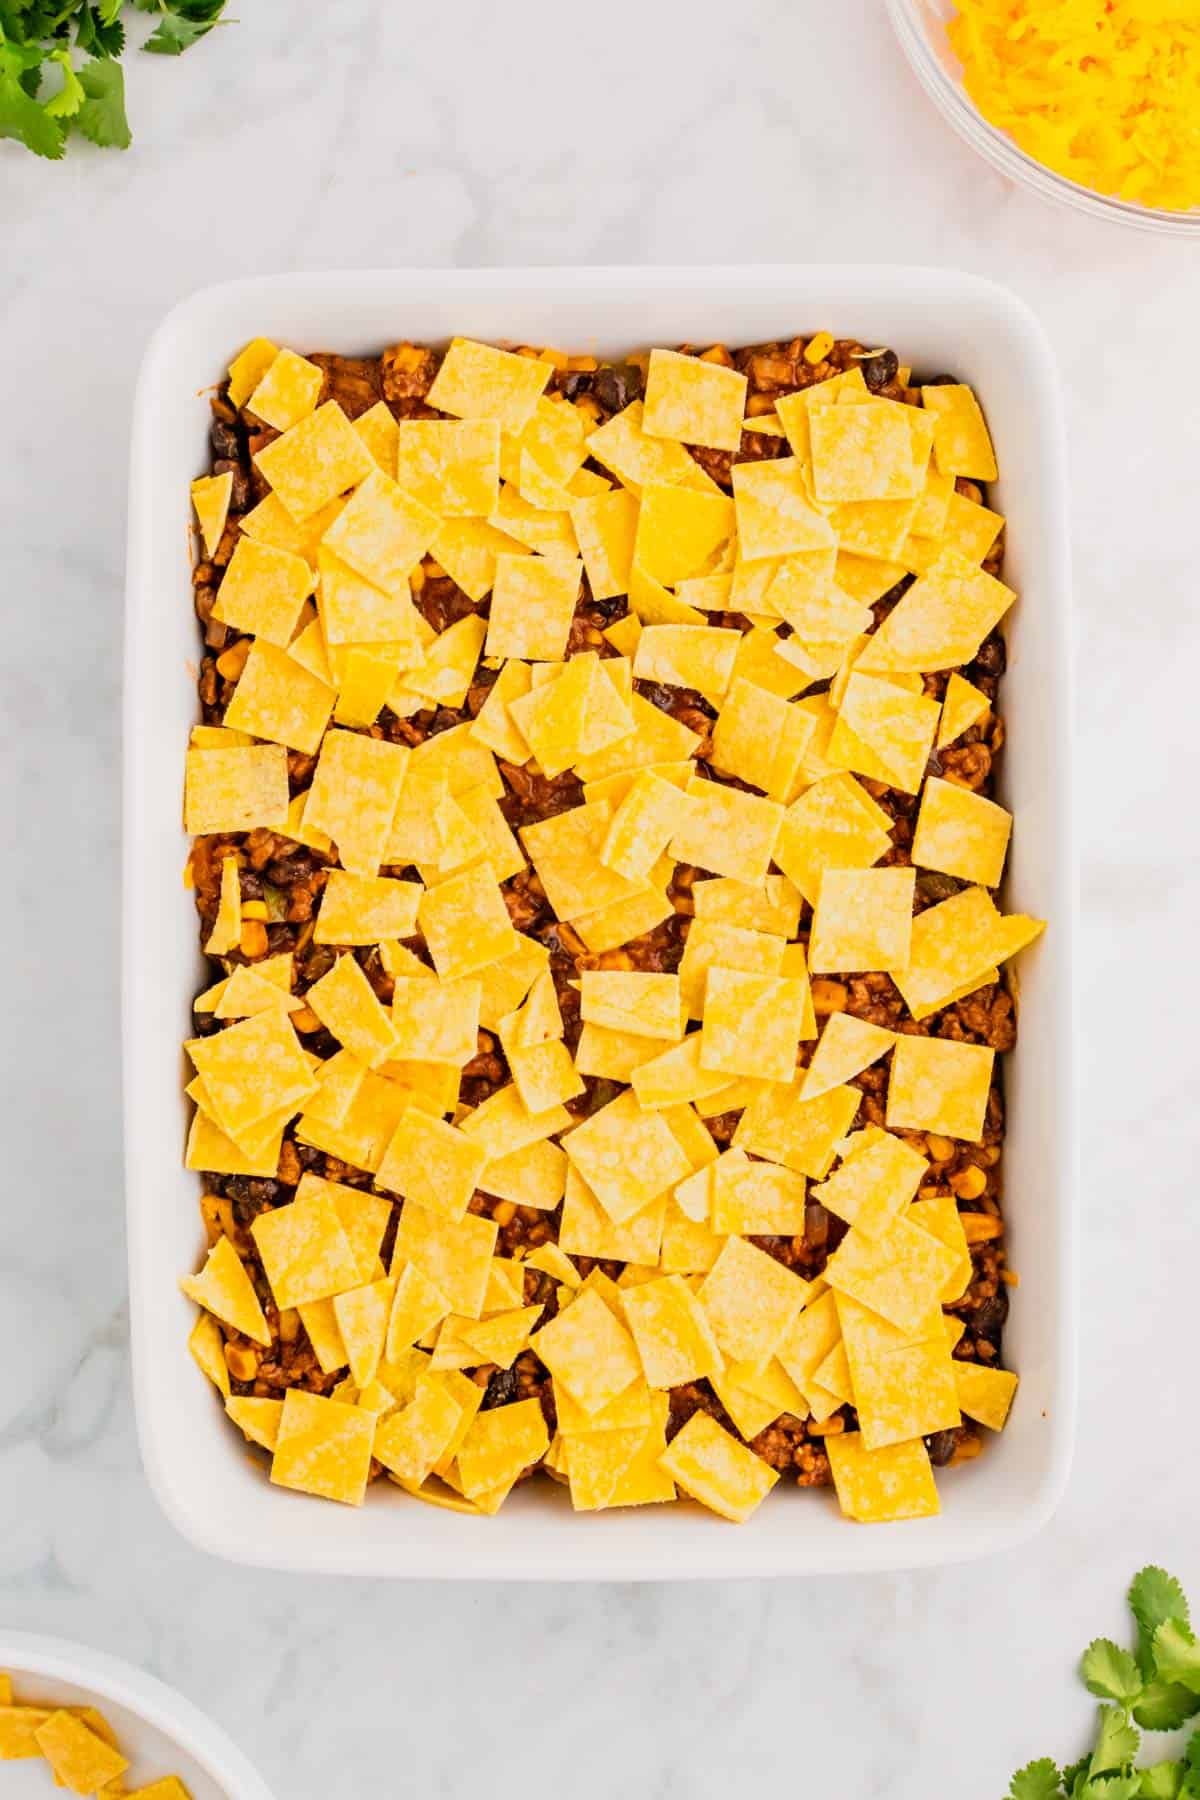 corn tortilla pieces on top of ground beef mixture in a baking dish